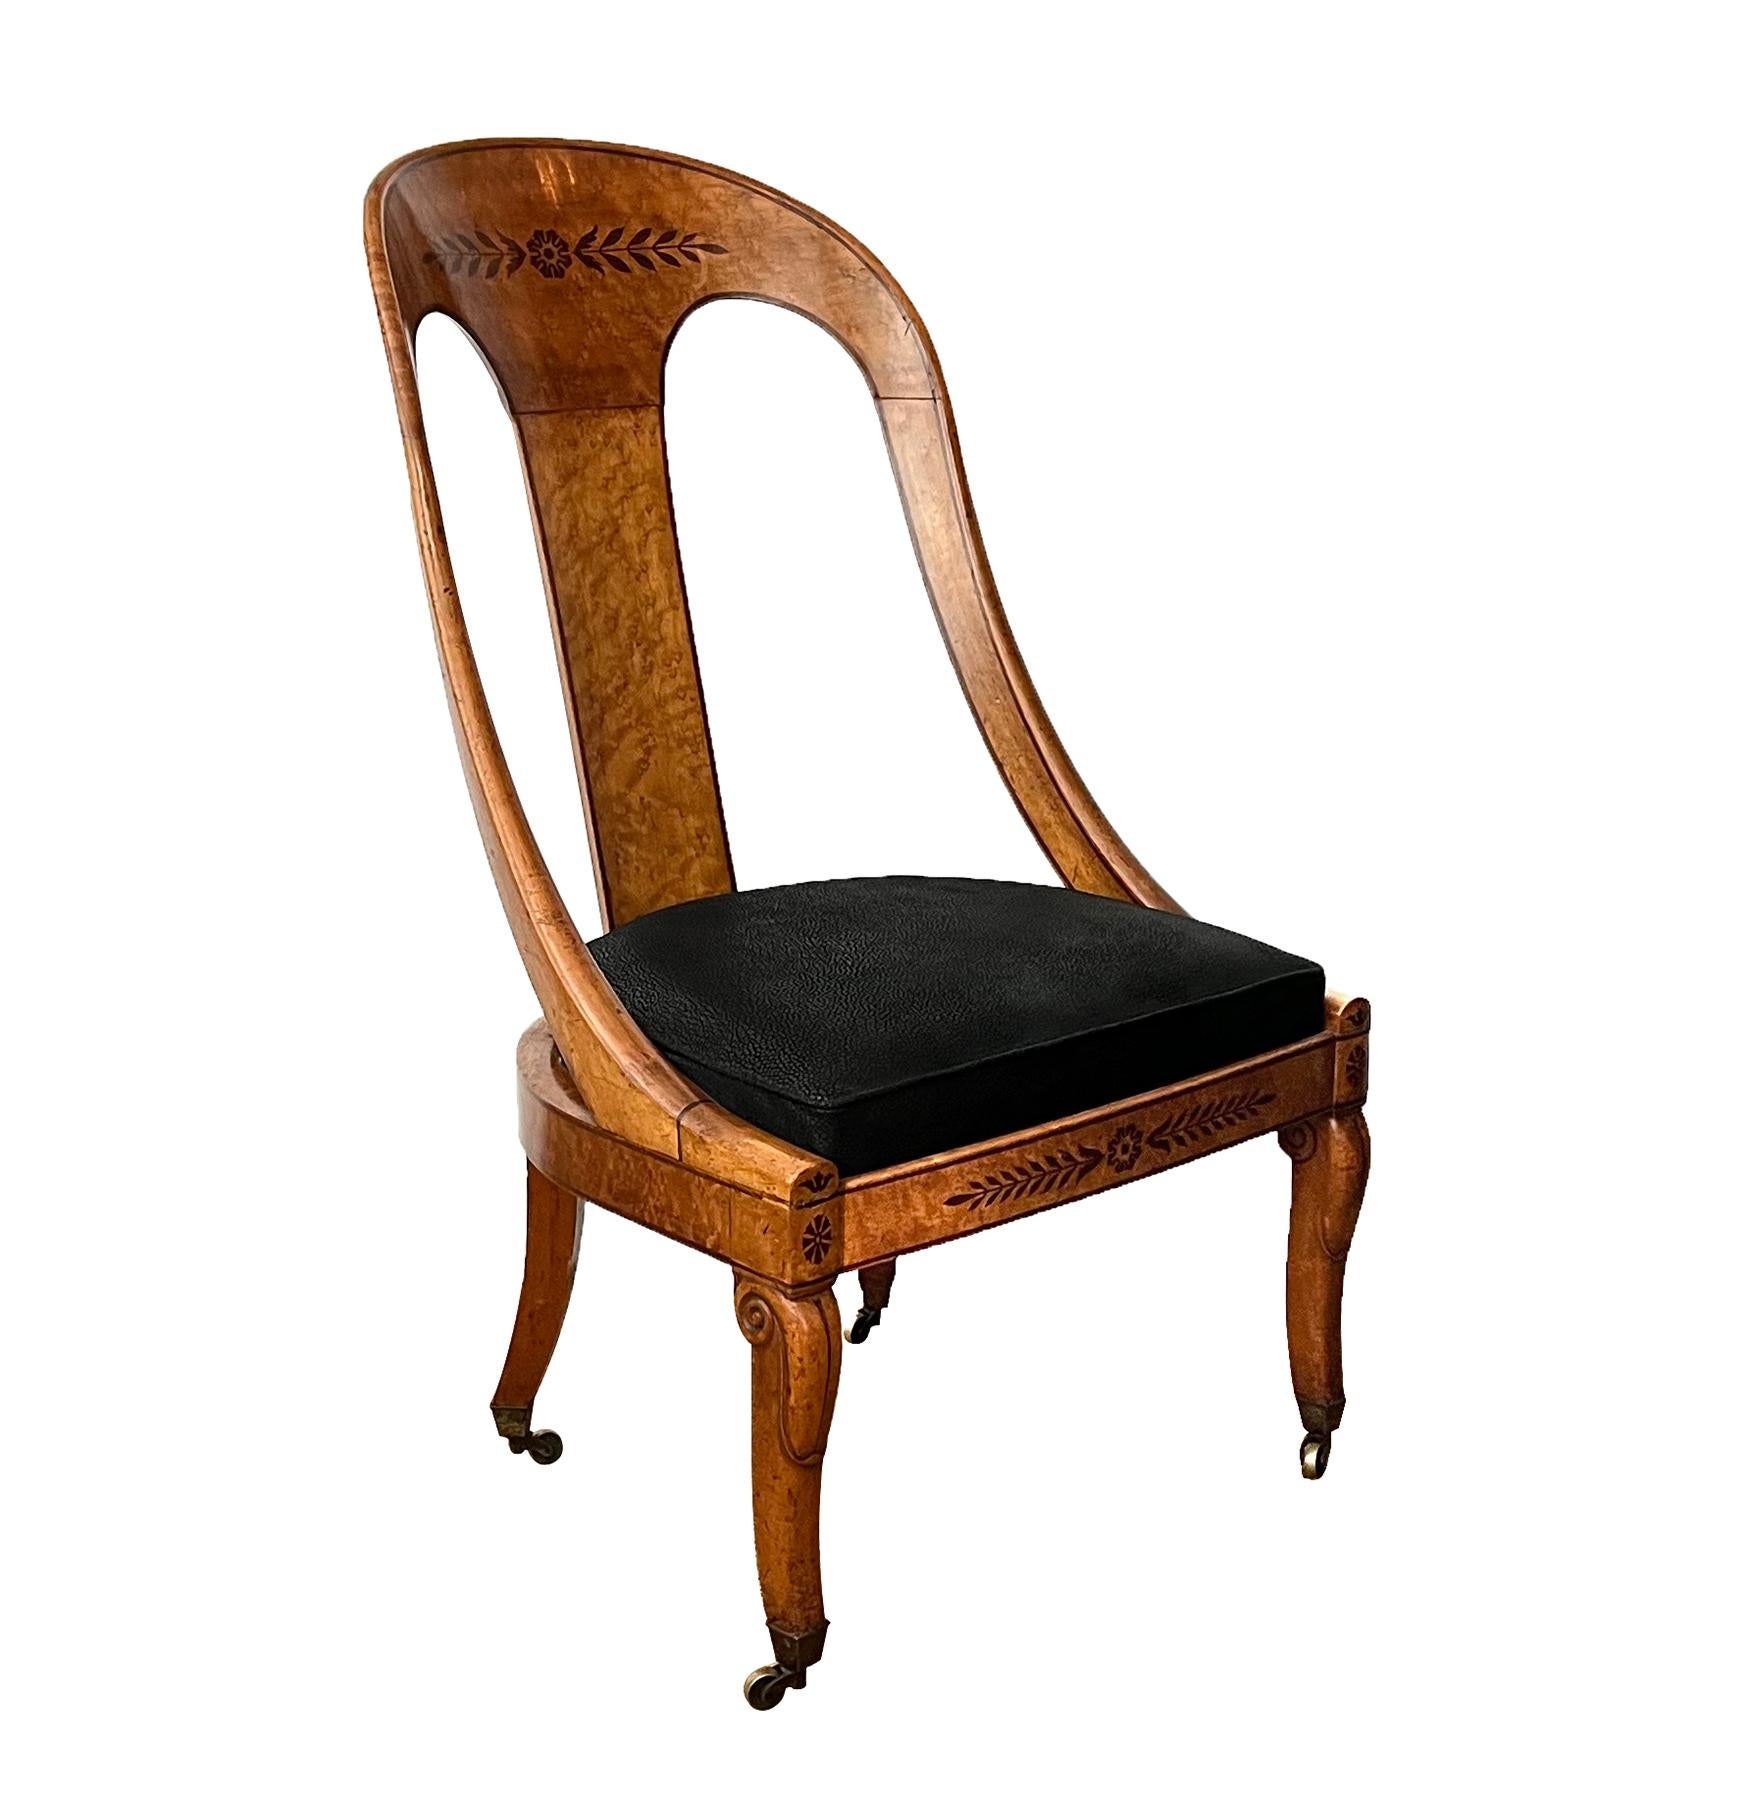 Handsome French Charles X Burl Birch Spoon Back Chair For Sale 2